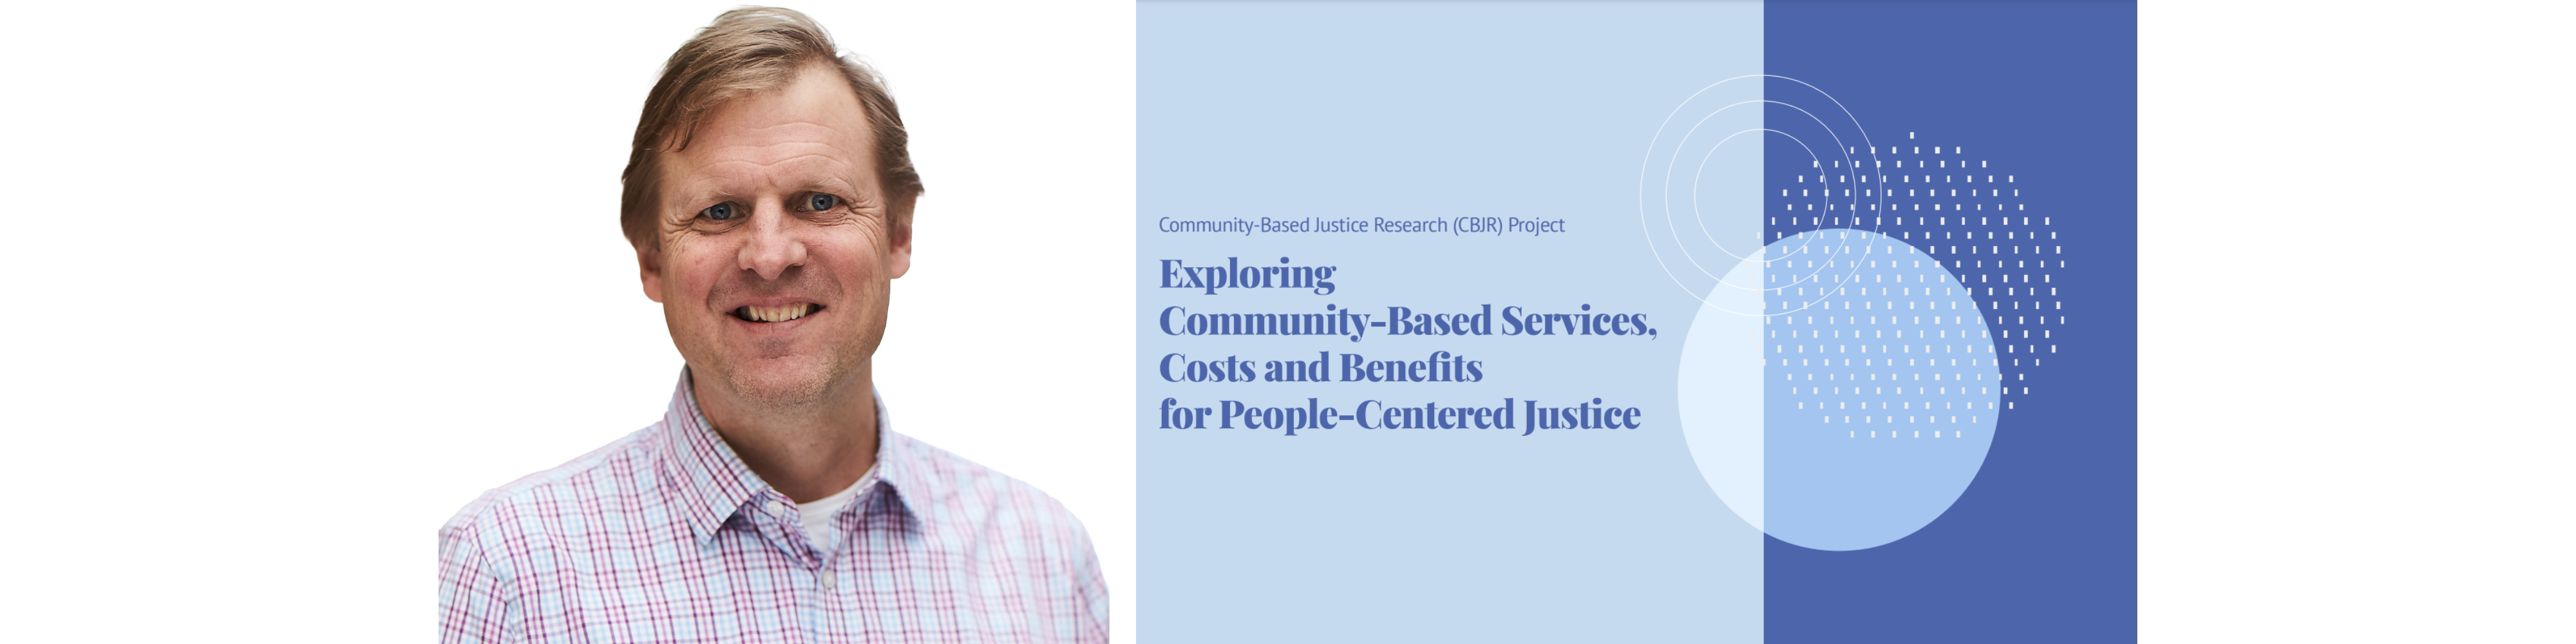 Professor Trevor Farrow and cover of international report on community-based justice services